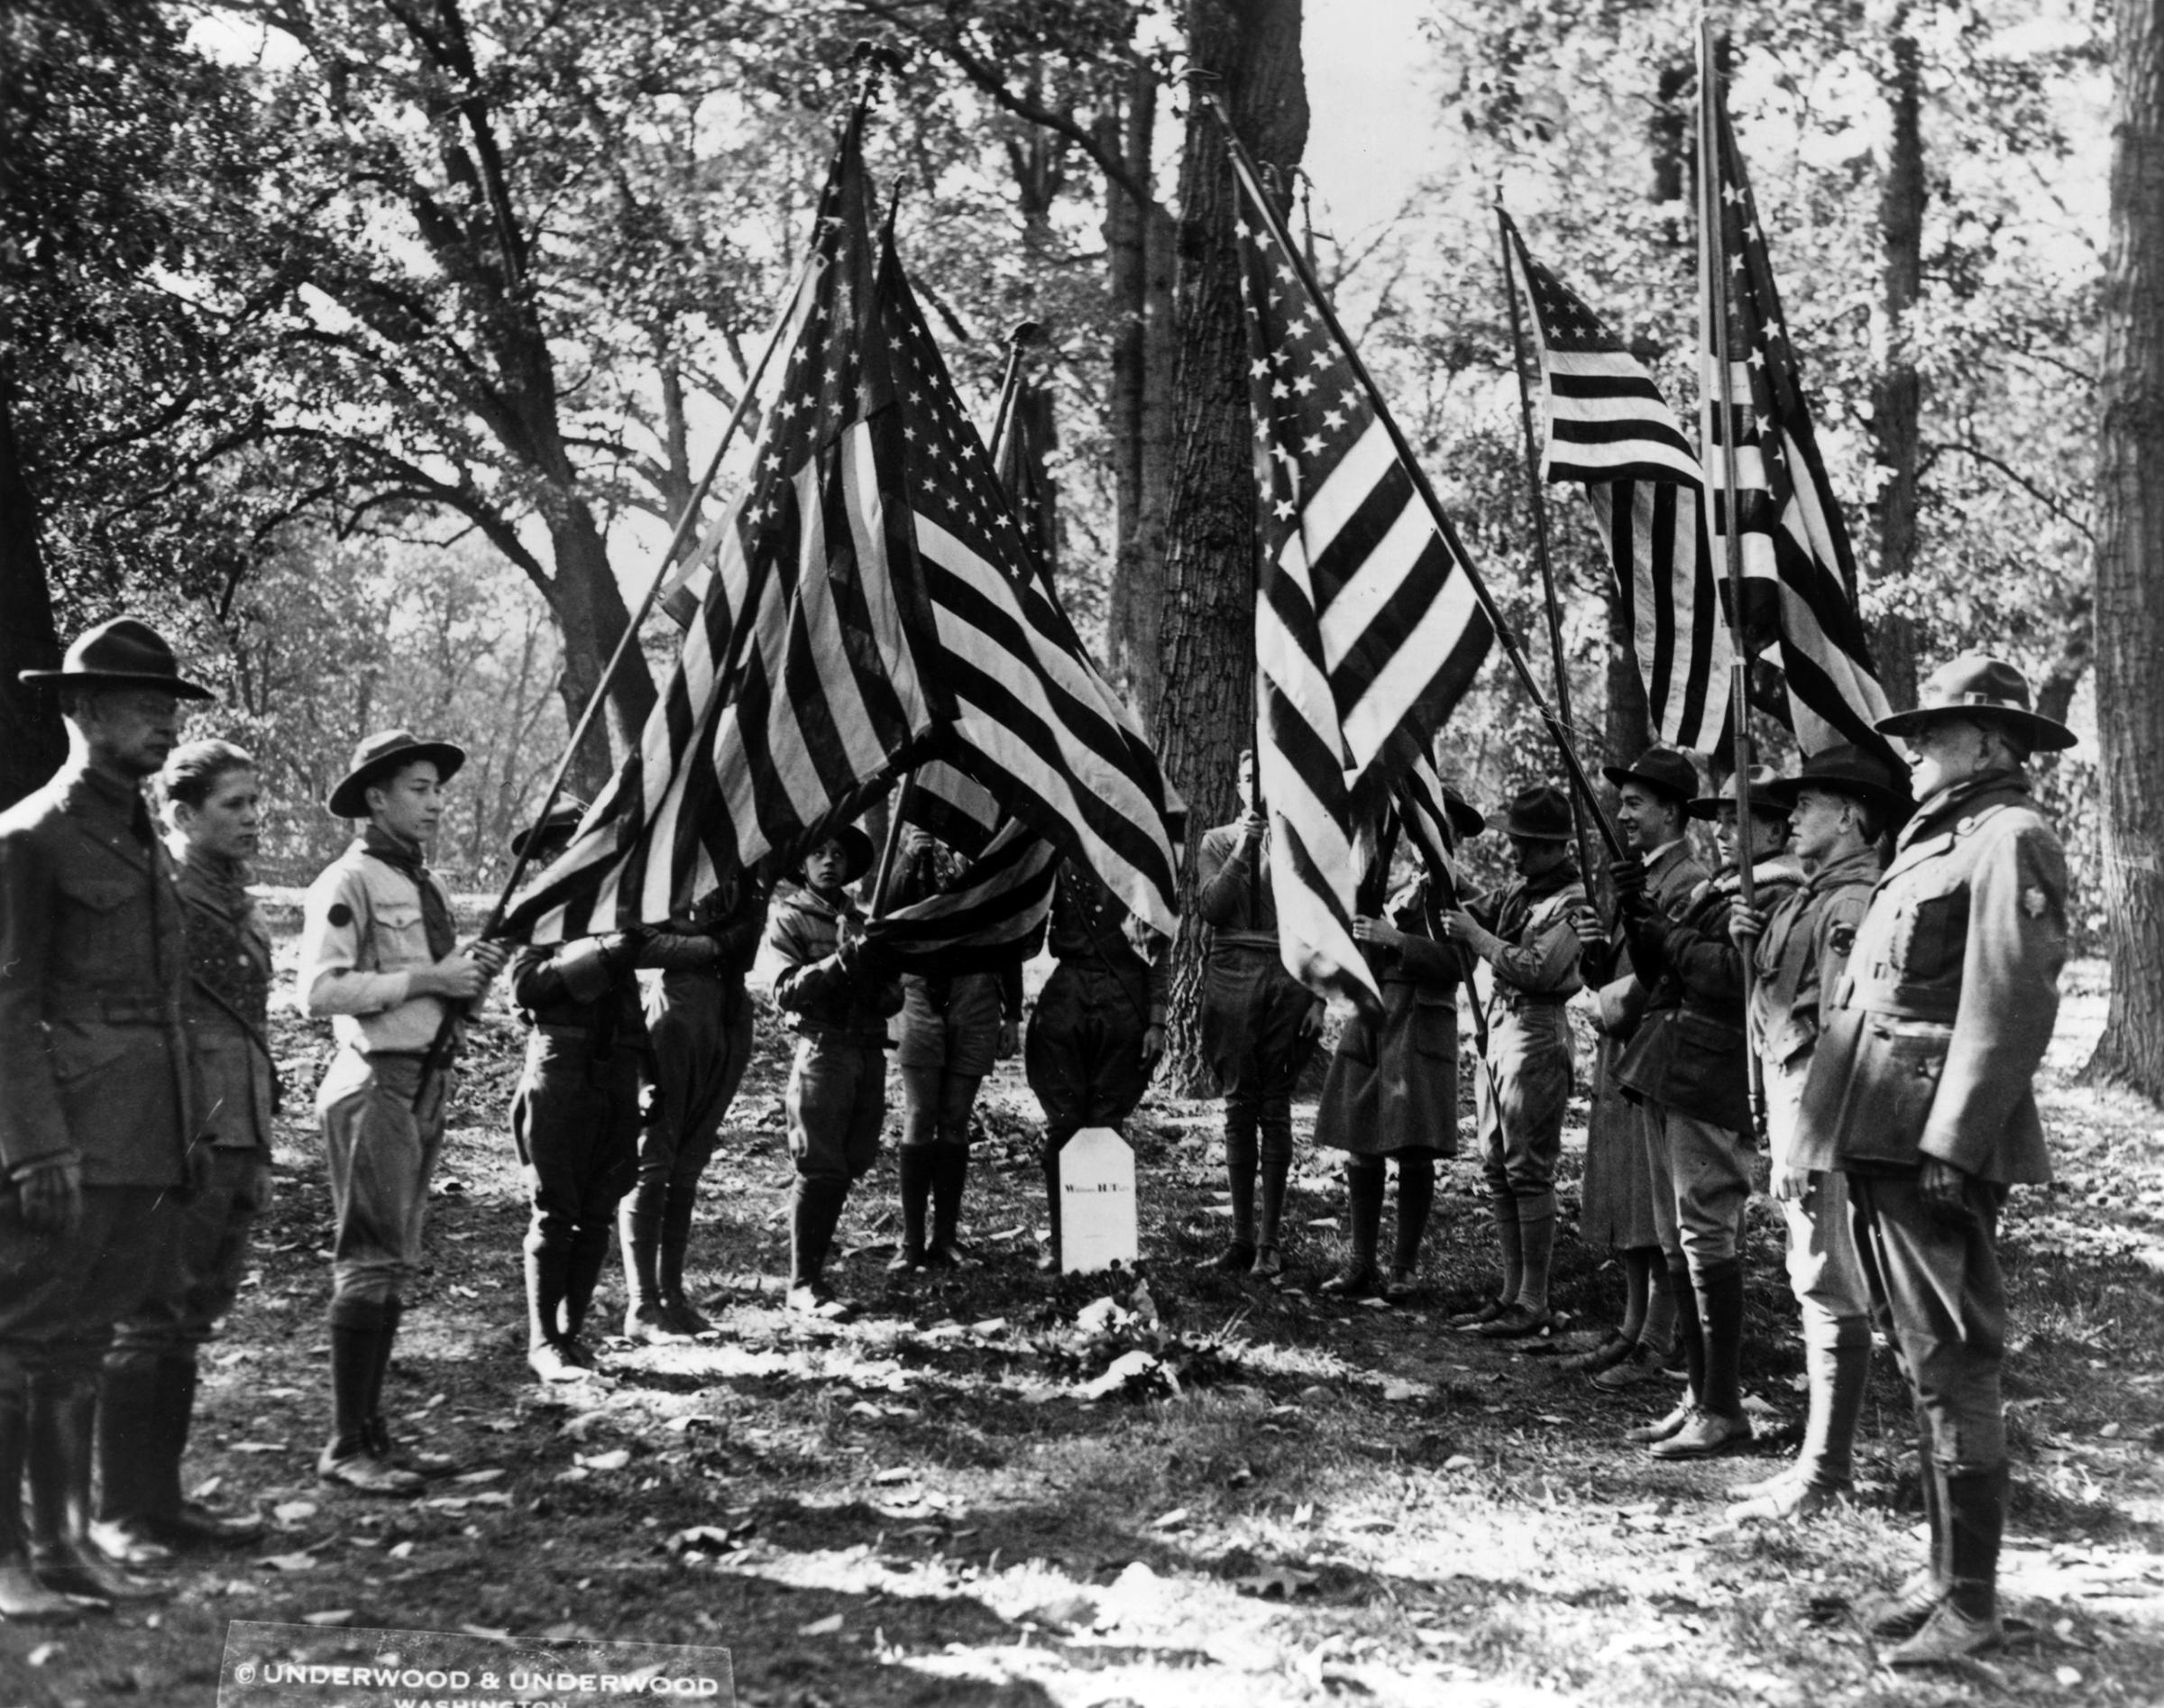 A delegation of boy scouts at the grave of former President William Howard Taft in Arlington National Cemetery, Washington DC, six months after his death. 1930.